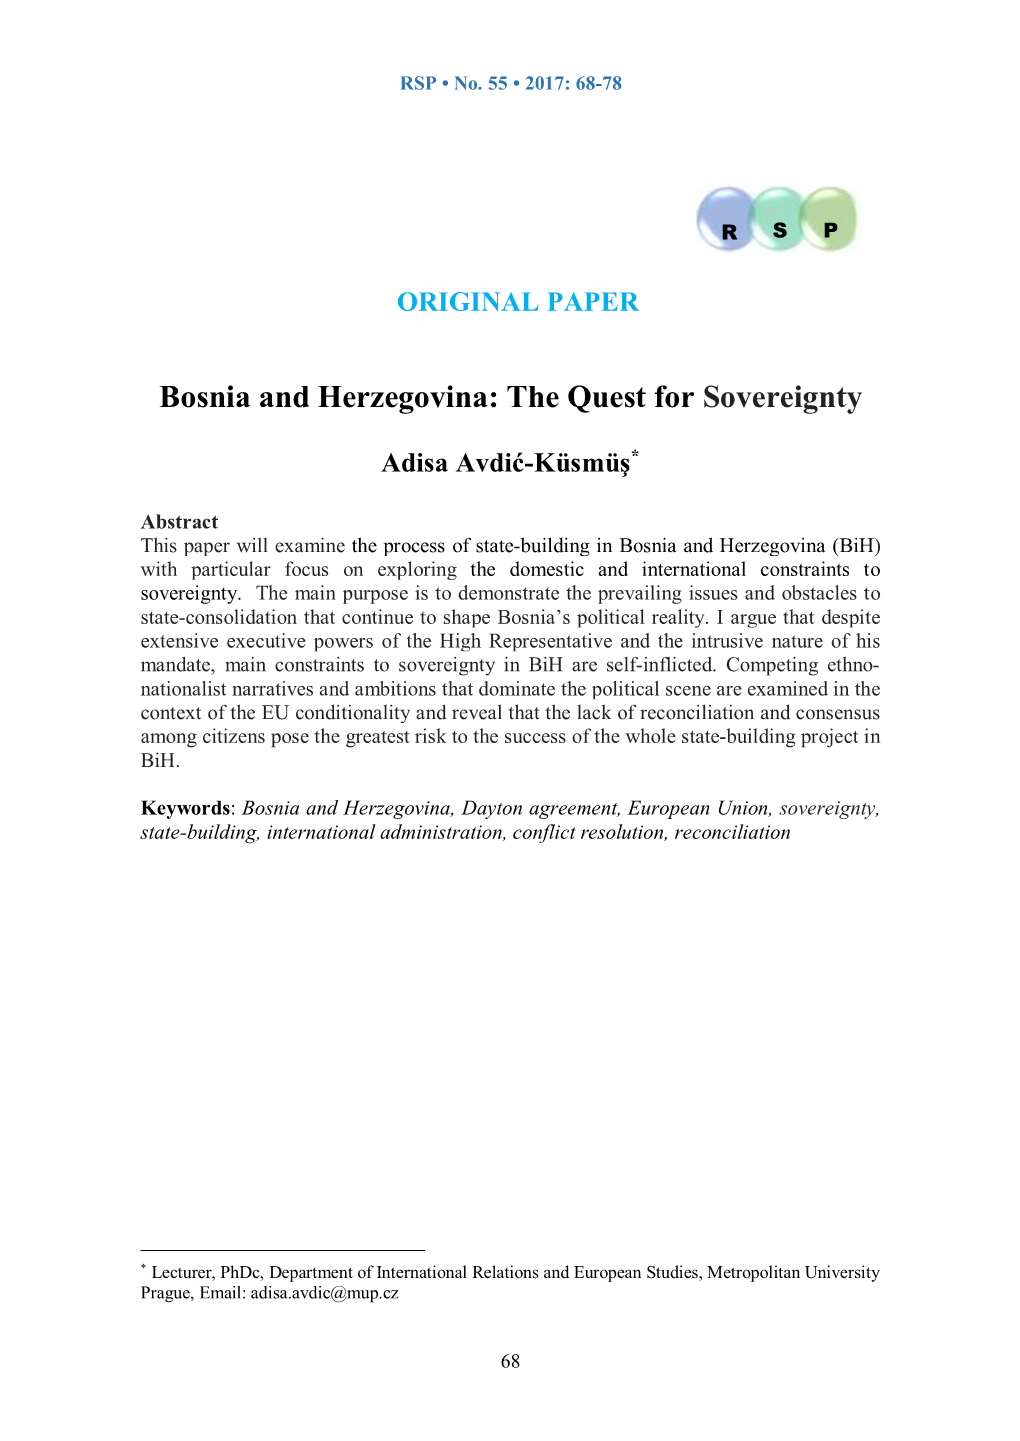 Bosnia and Herzegovina: the Quest for Sovereignty